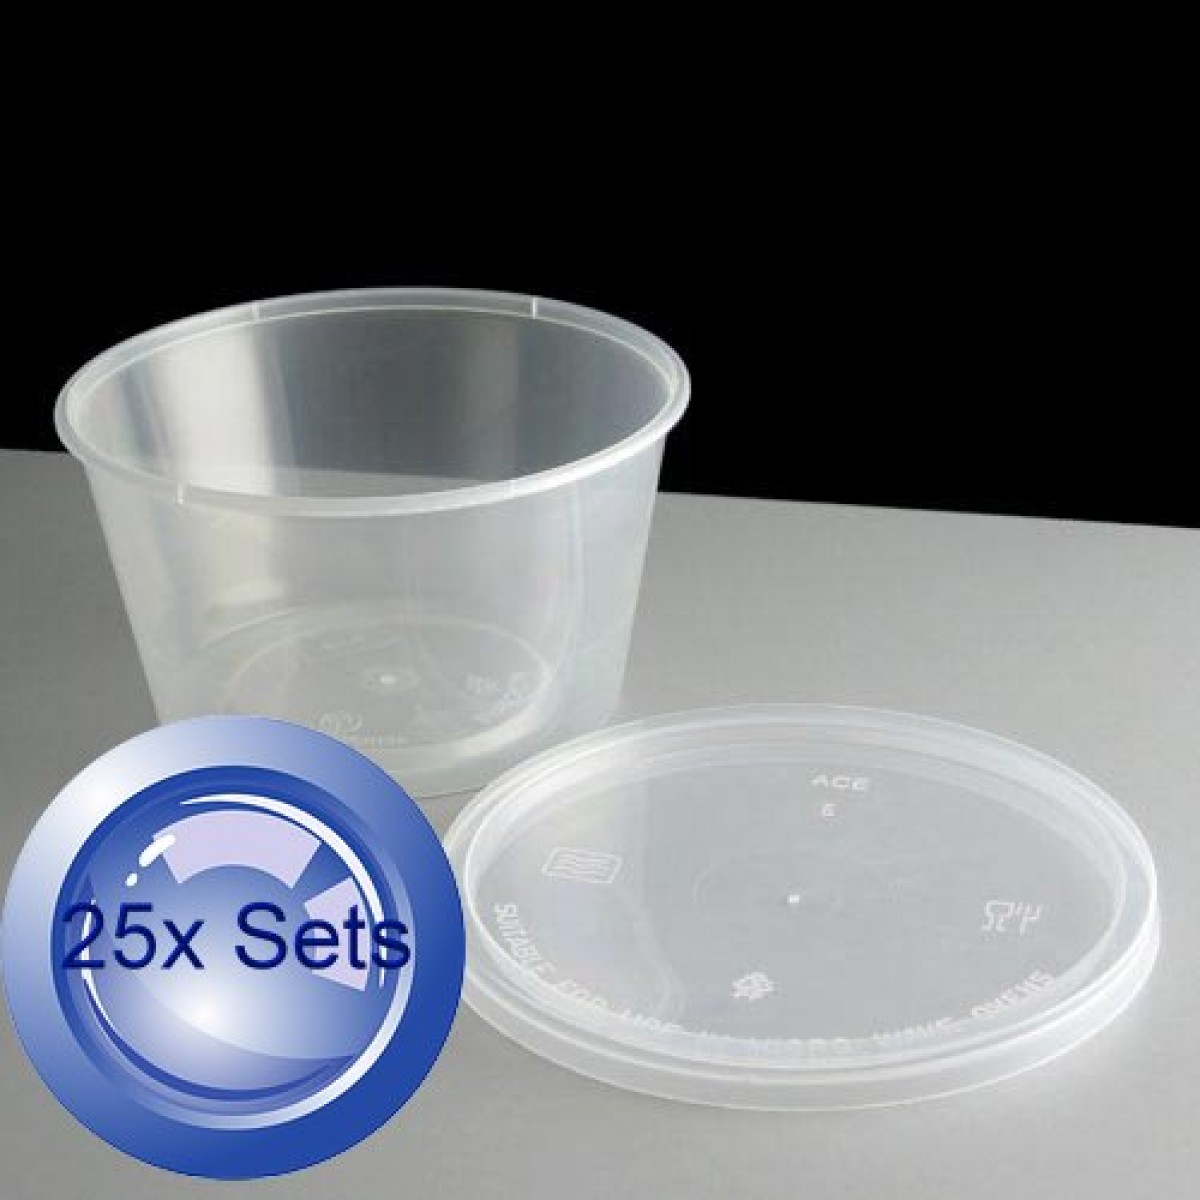 Get $1.71 OFF on 25X Round Plastic Food Containers & Lids 560mL now $5.98